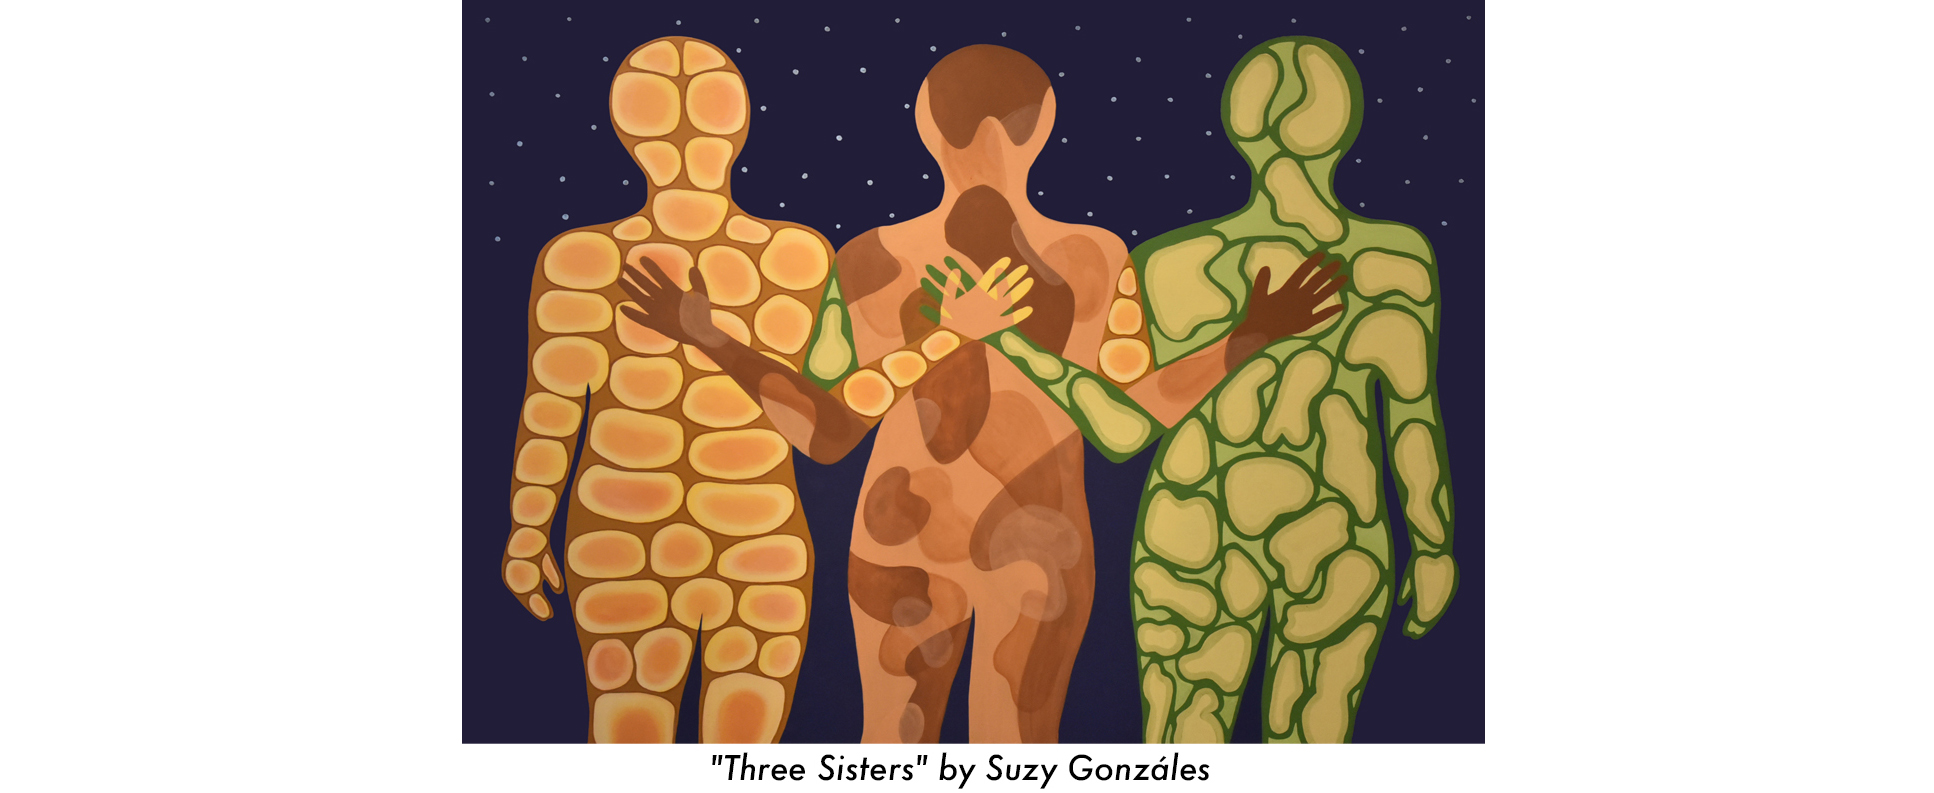 Three figures stand beneath a night sky, hands on each other's backs